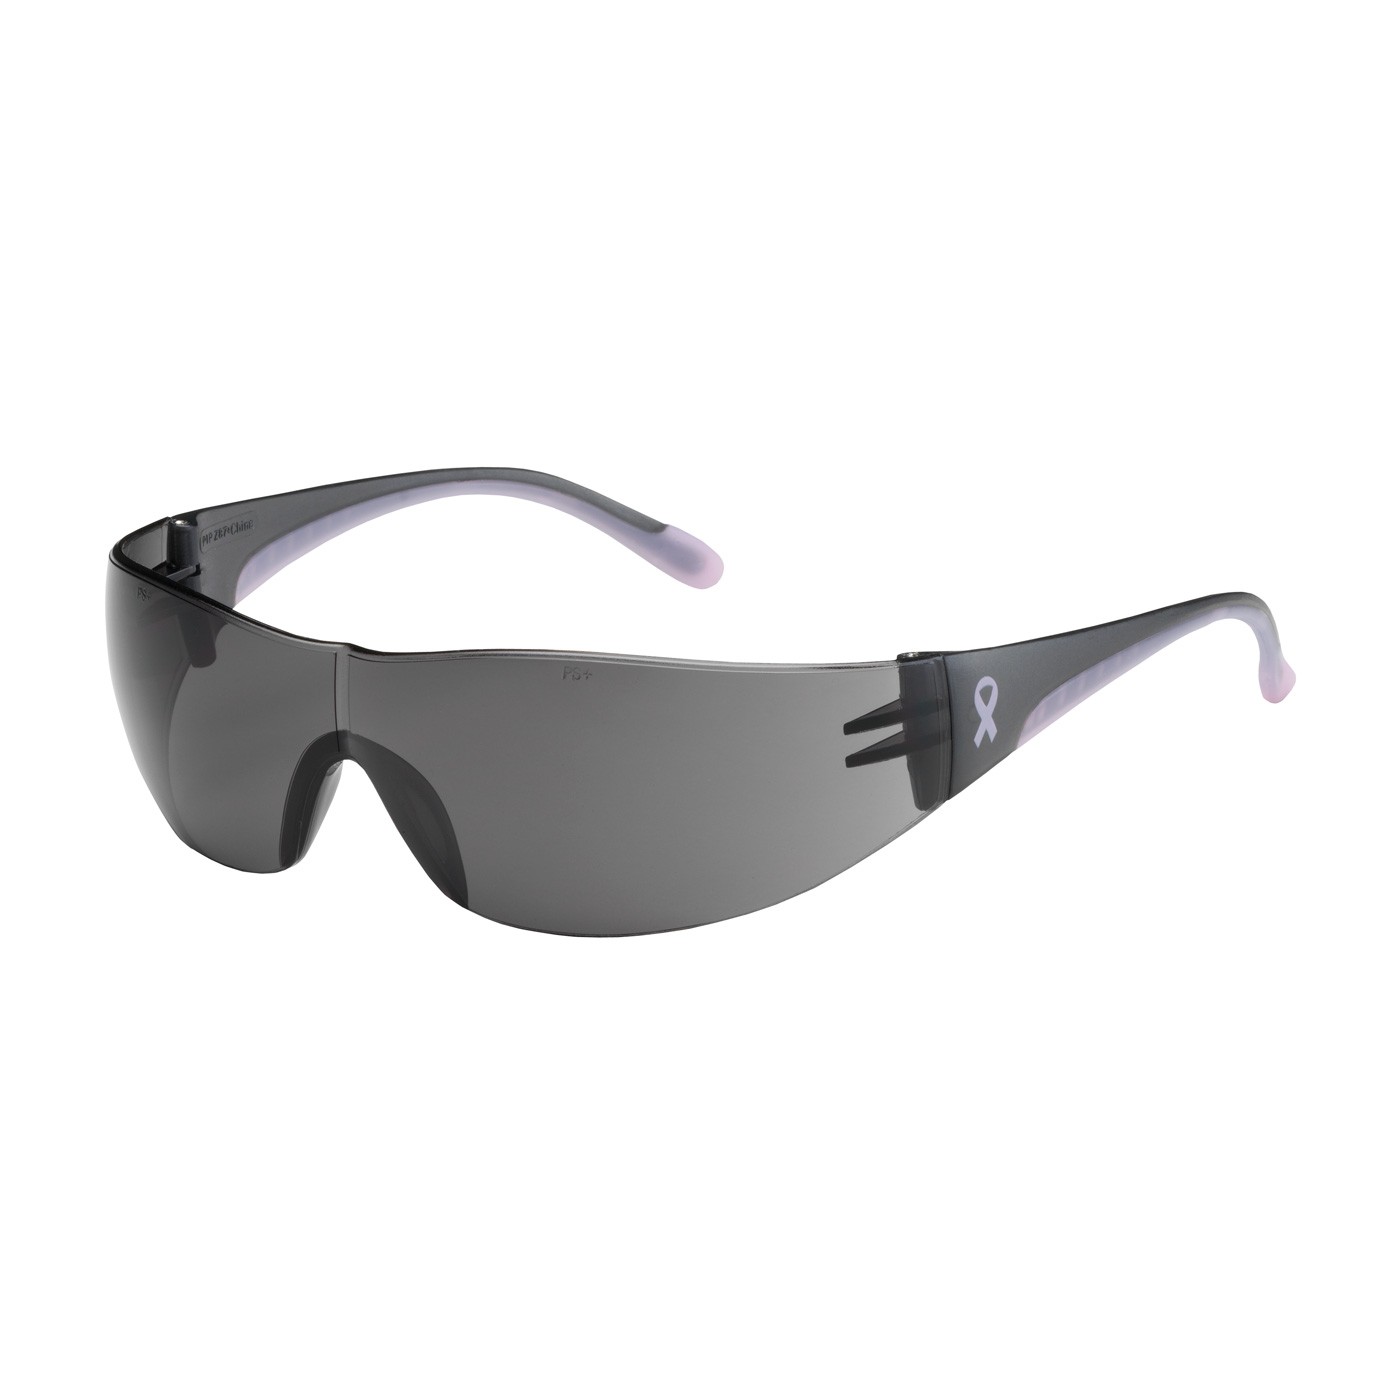 Eva® Rimless Safety Glasses with Gray / Pink Temple, Gray Lens and Anti-Scratch Coating  (#250-10-5501)